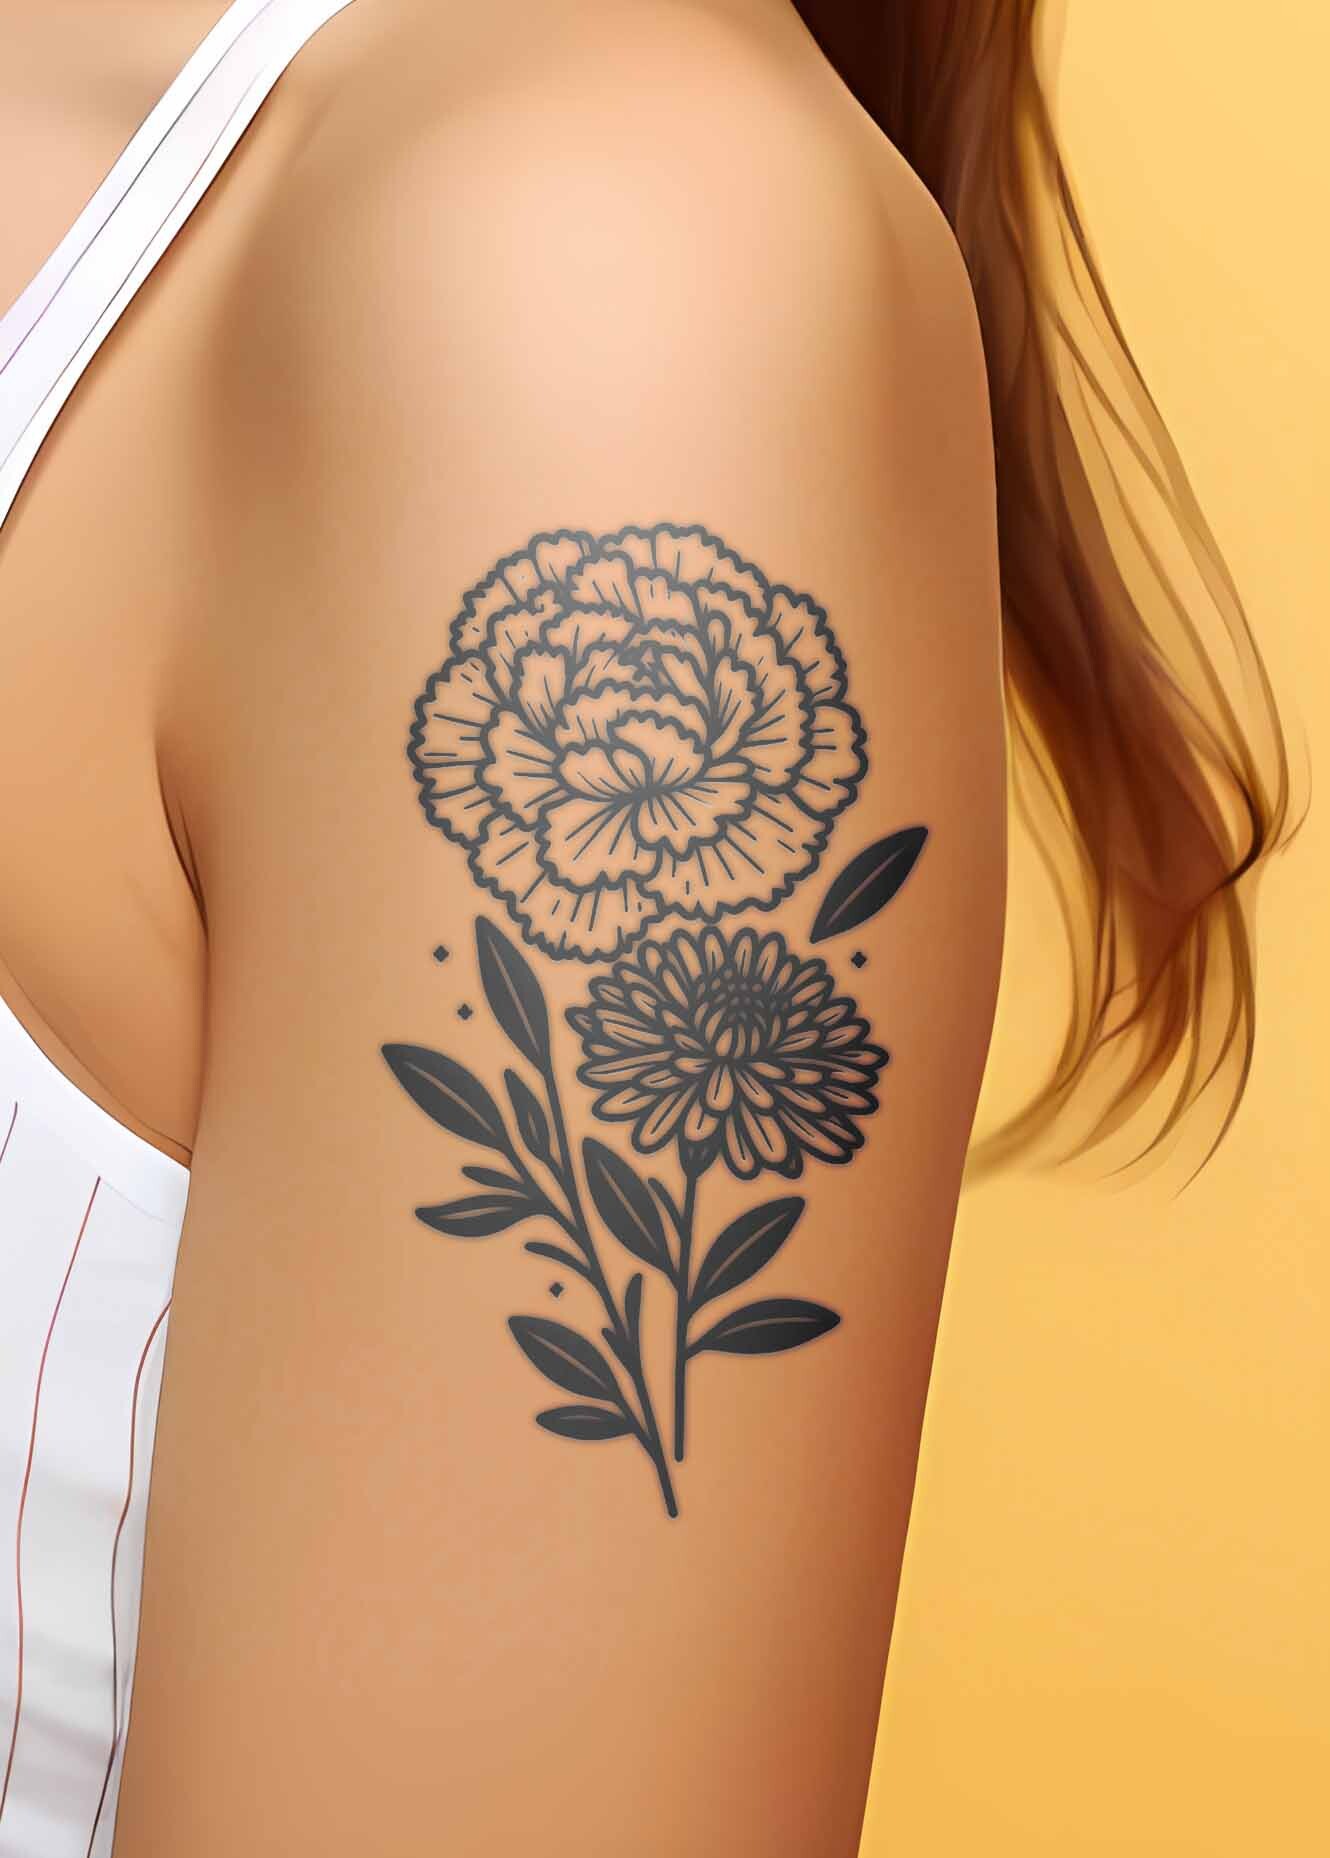 Chrysanthemum tattoo placed on the upper arm, done in